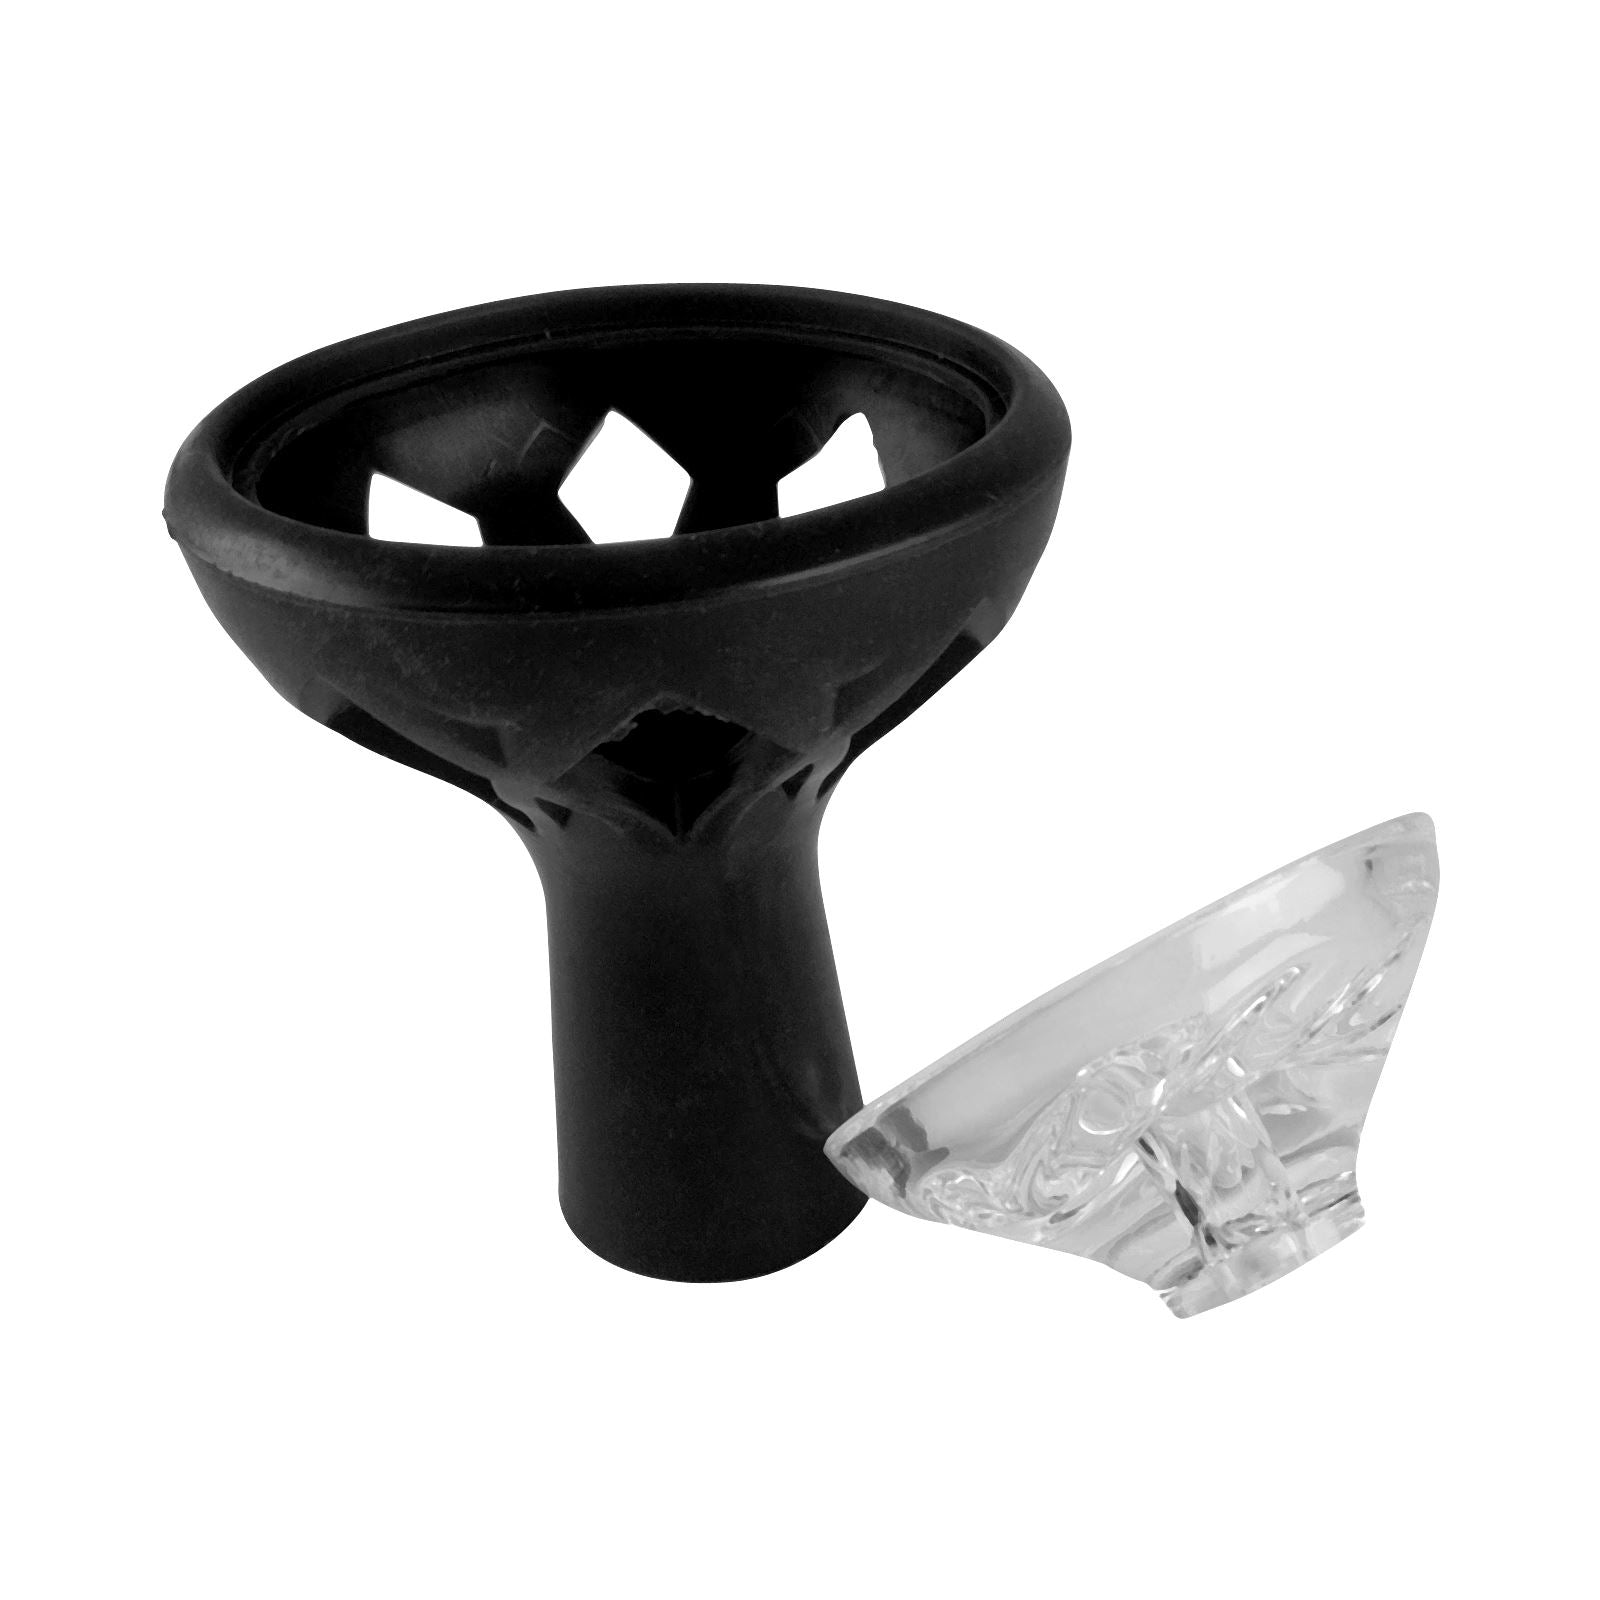 Glass and Silicone Combi Bowl